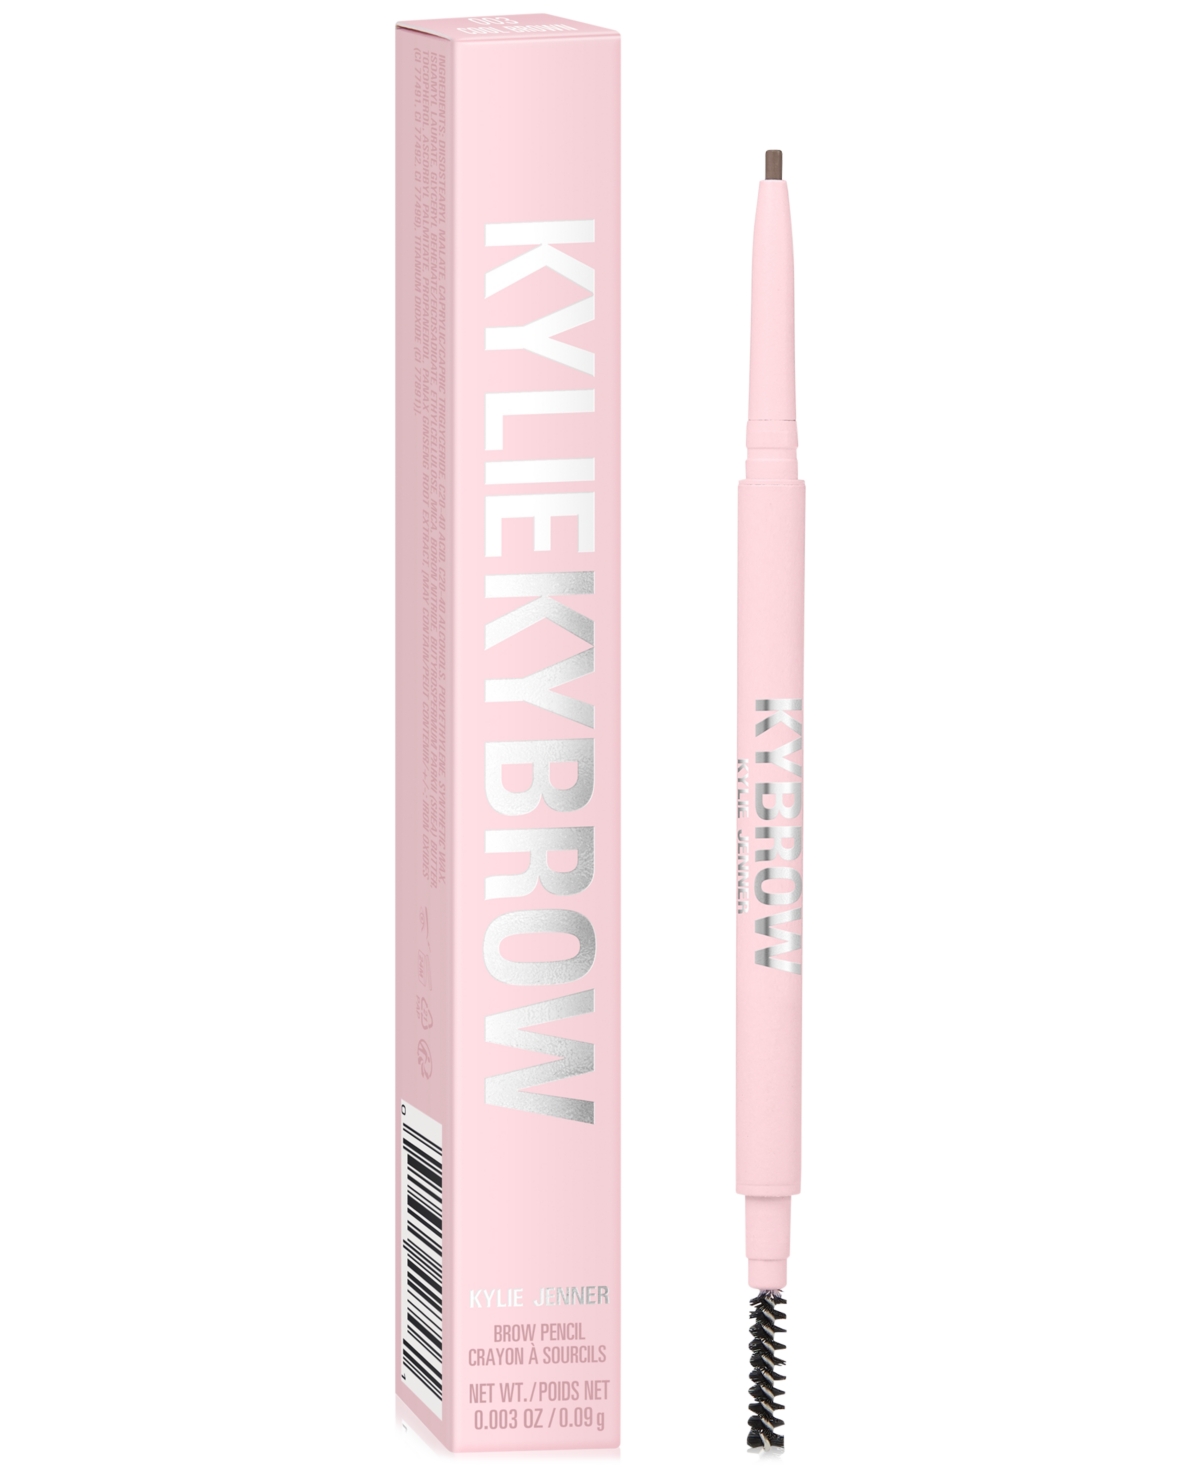 Kylie Cosmetics Kybrow Brow Pencil In Cool Brown